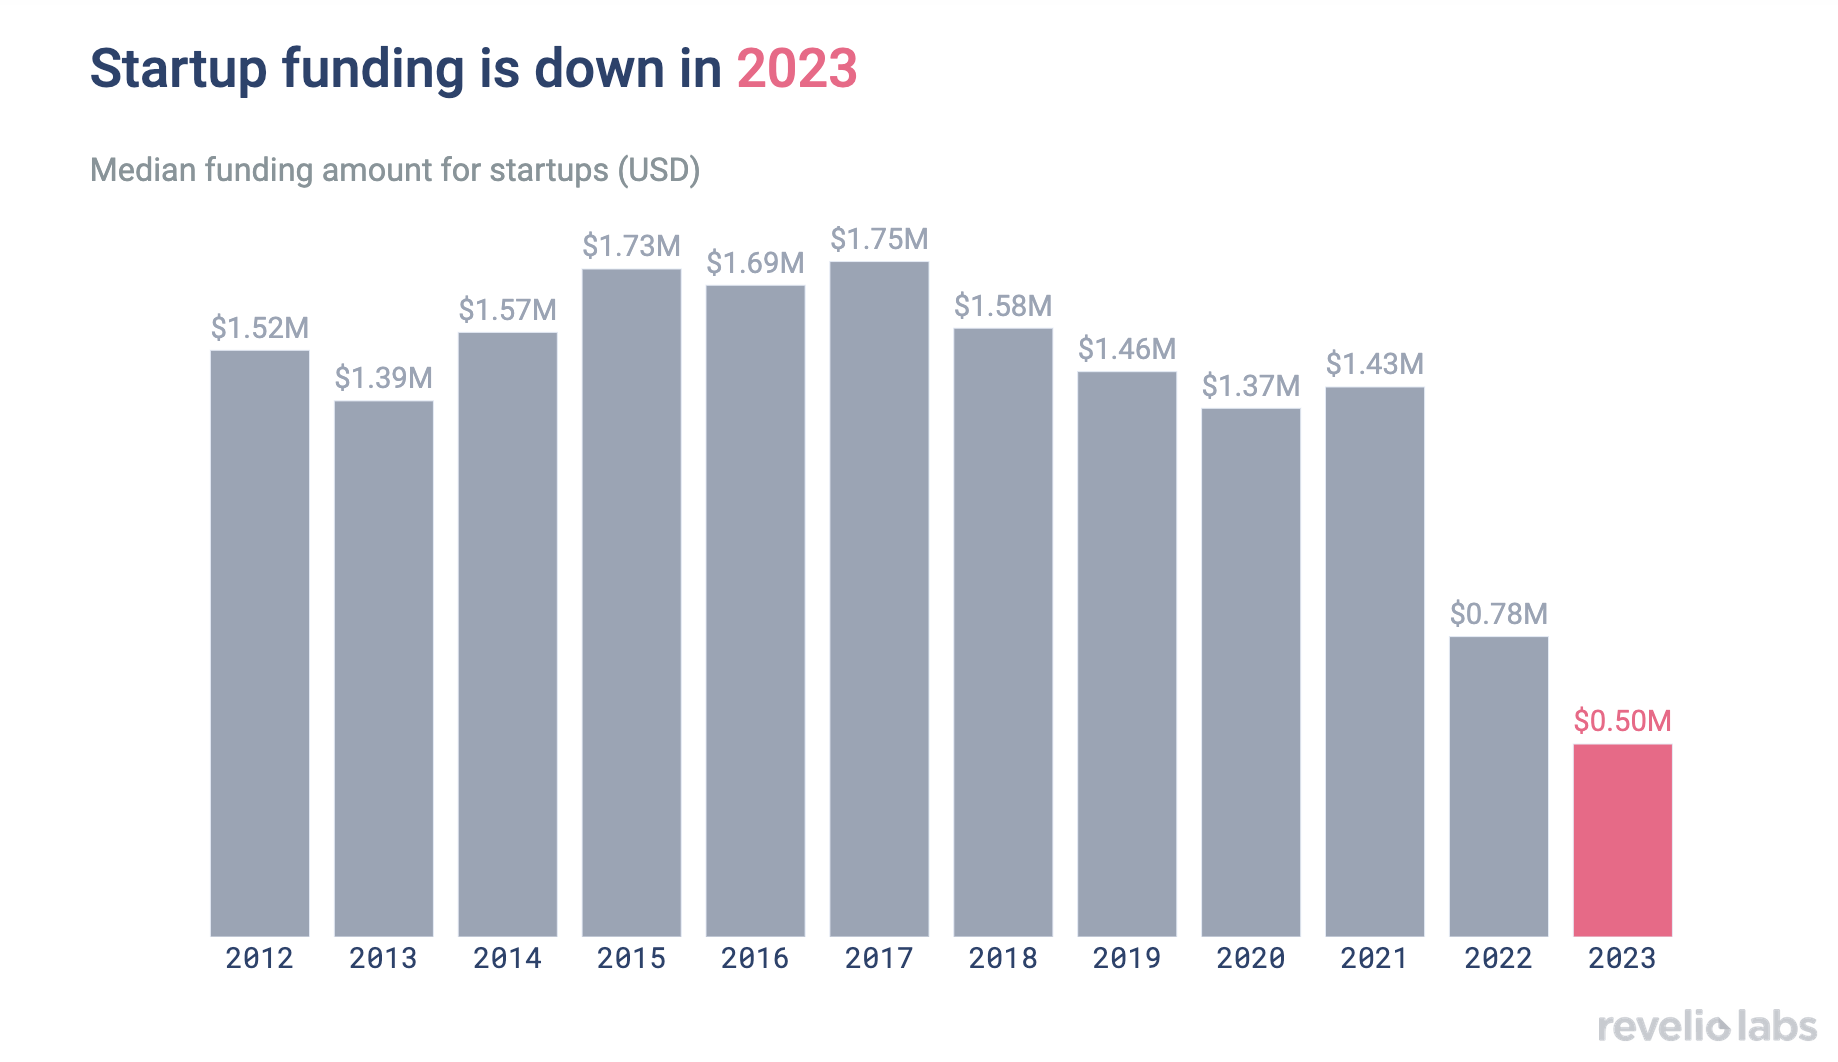 Startup funding is down in 2023